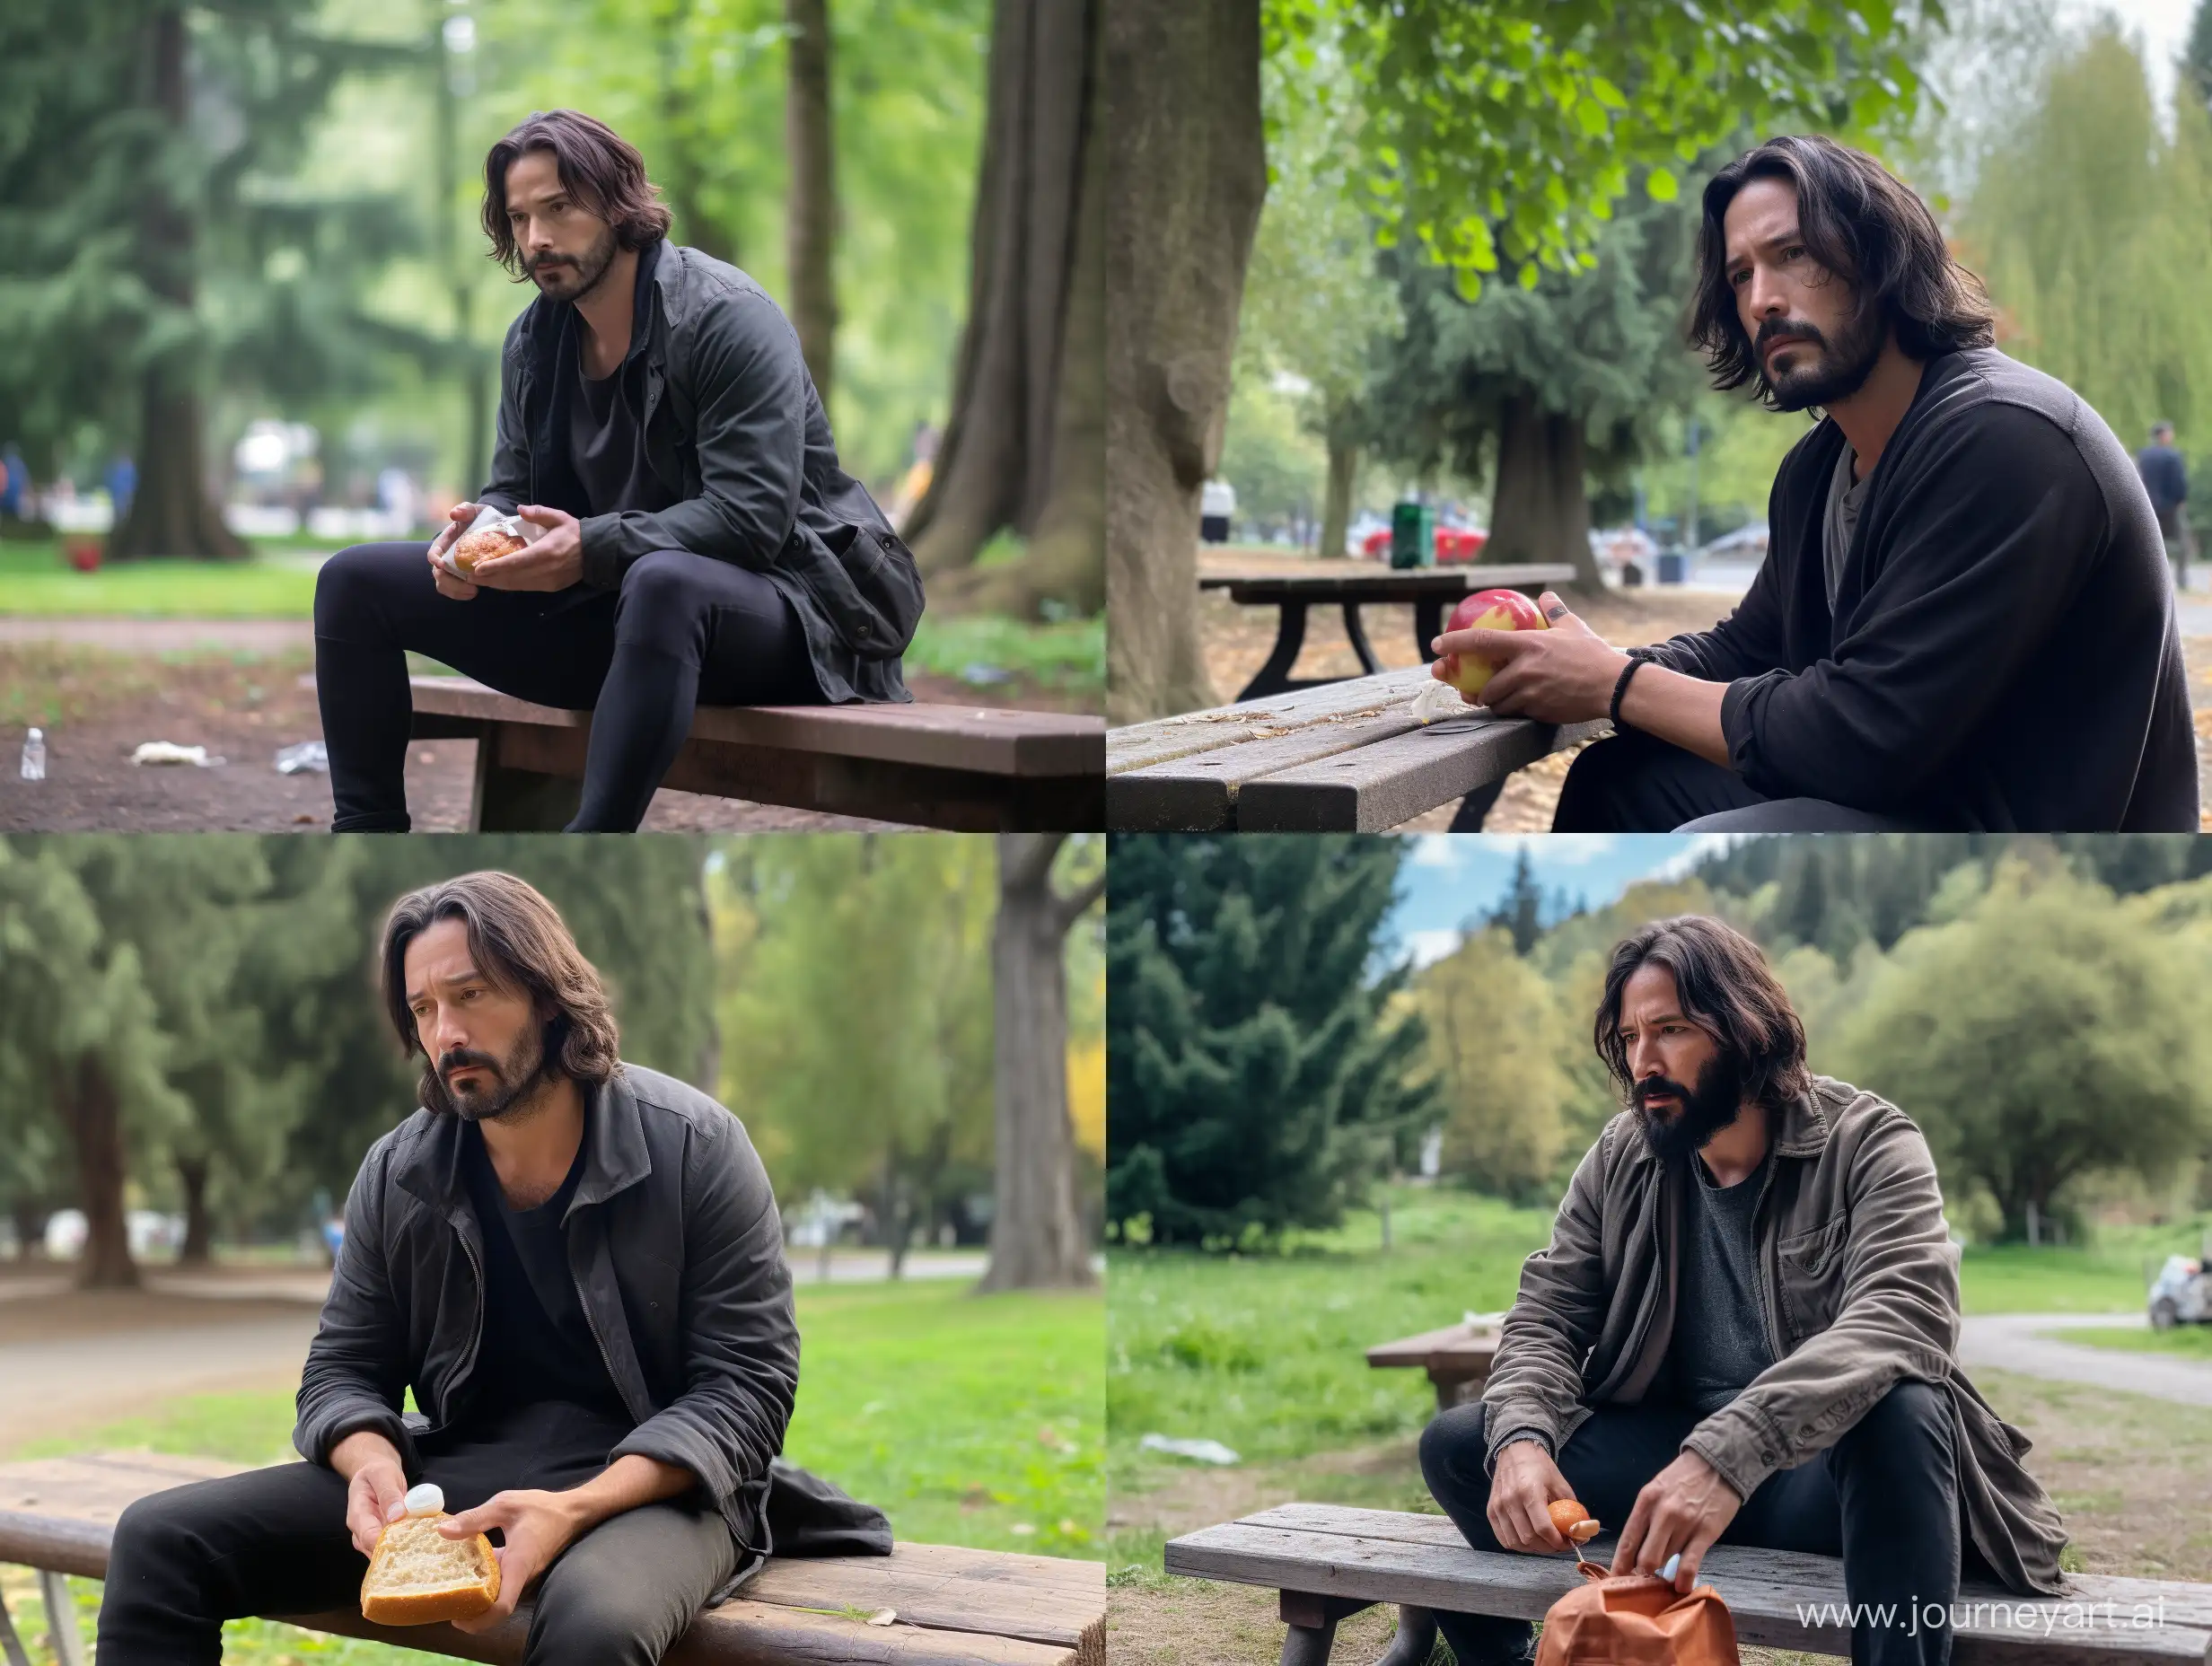 Keanu-Reeves-Reflects-in-Solitude-Enjoying-a-Tranquil-Day-in-the-Park